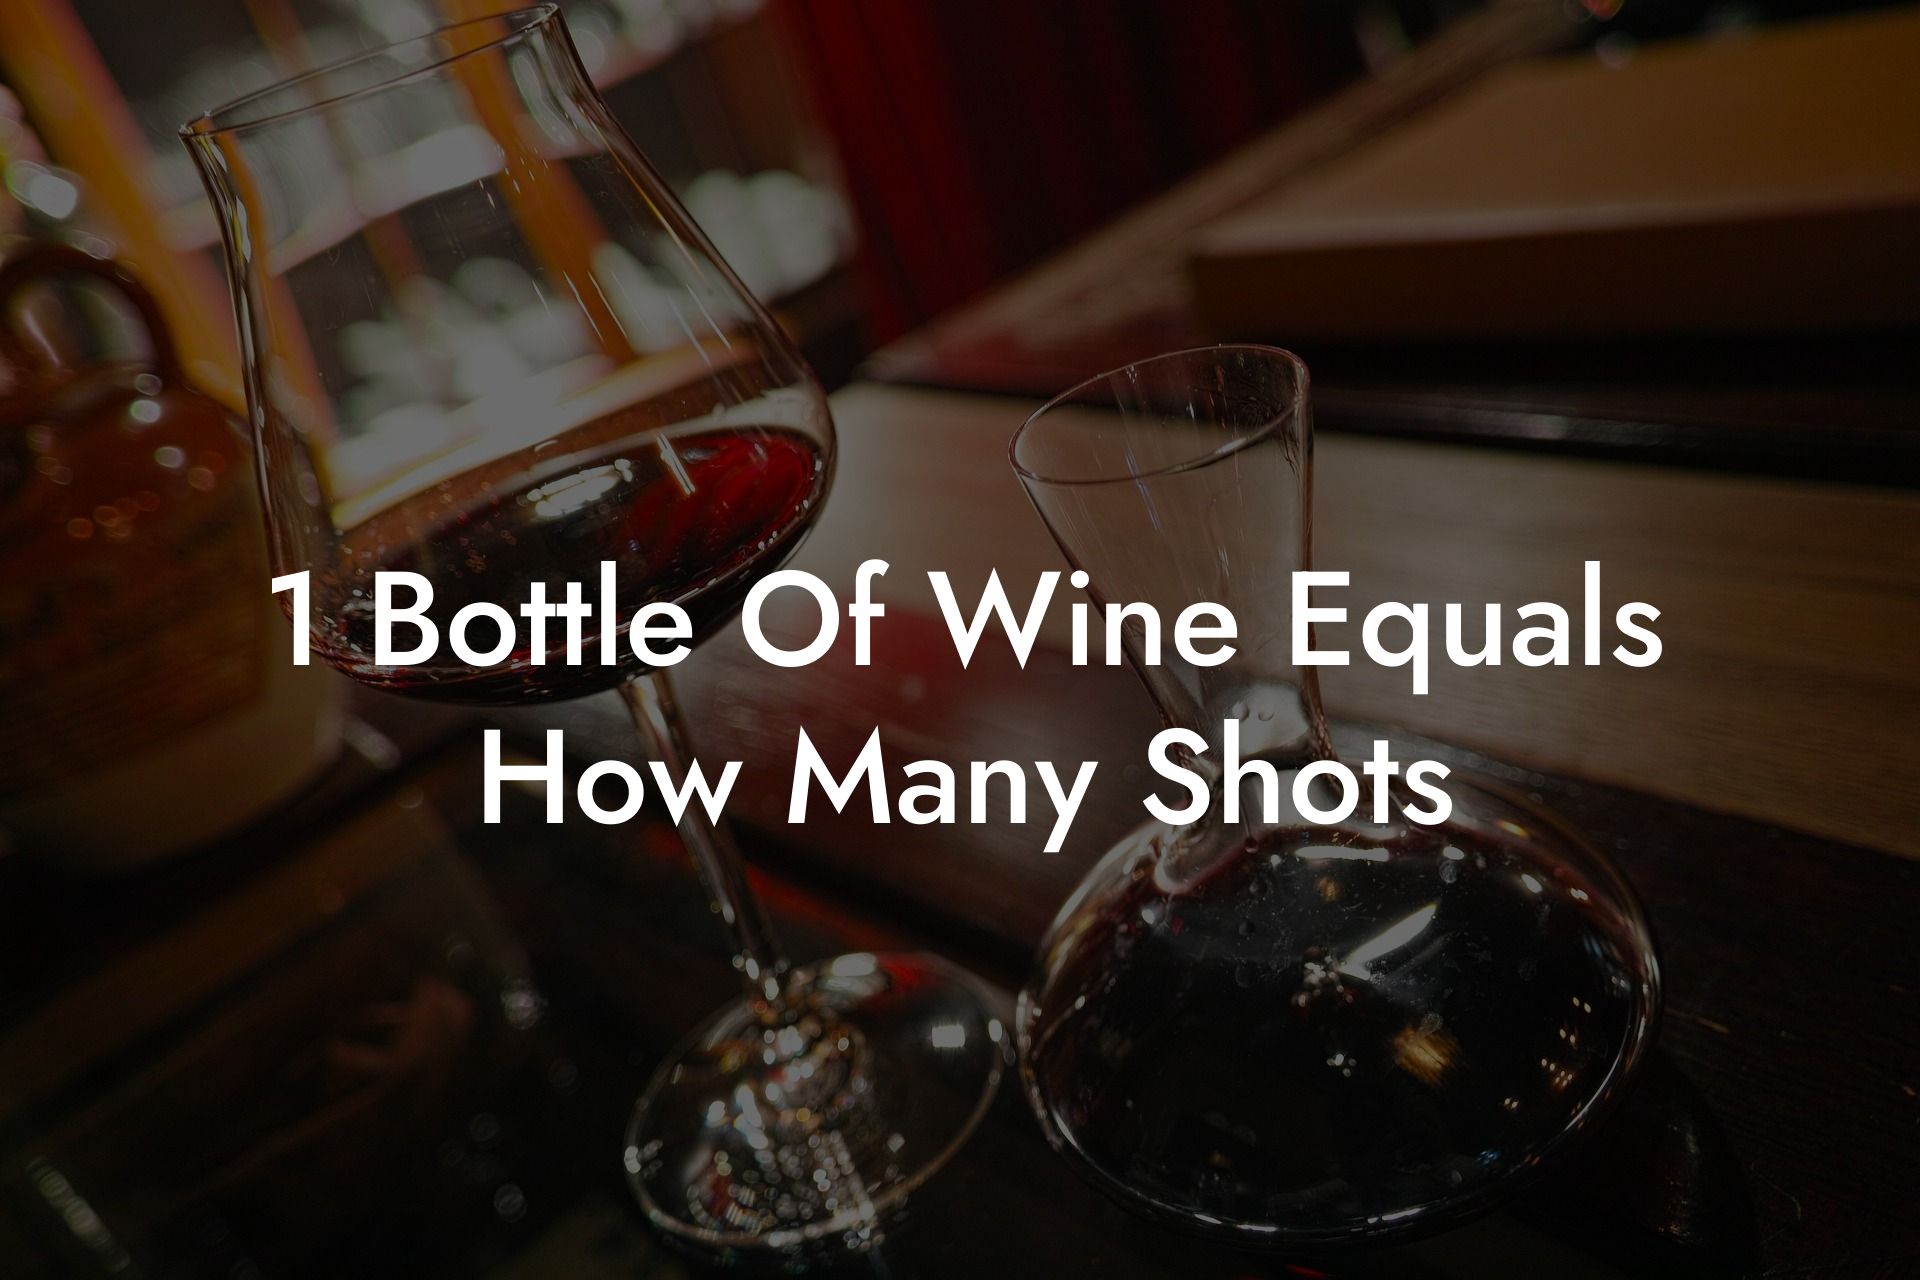 1 Bottle Of Wine Equals How Many Shots